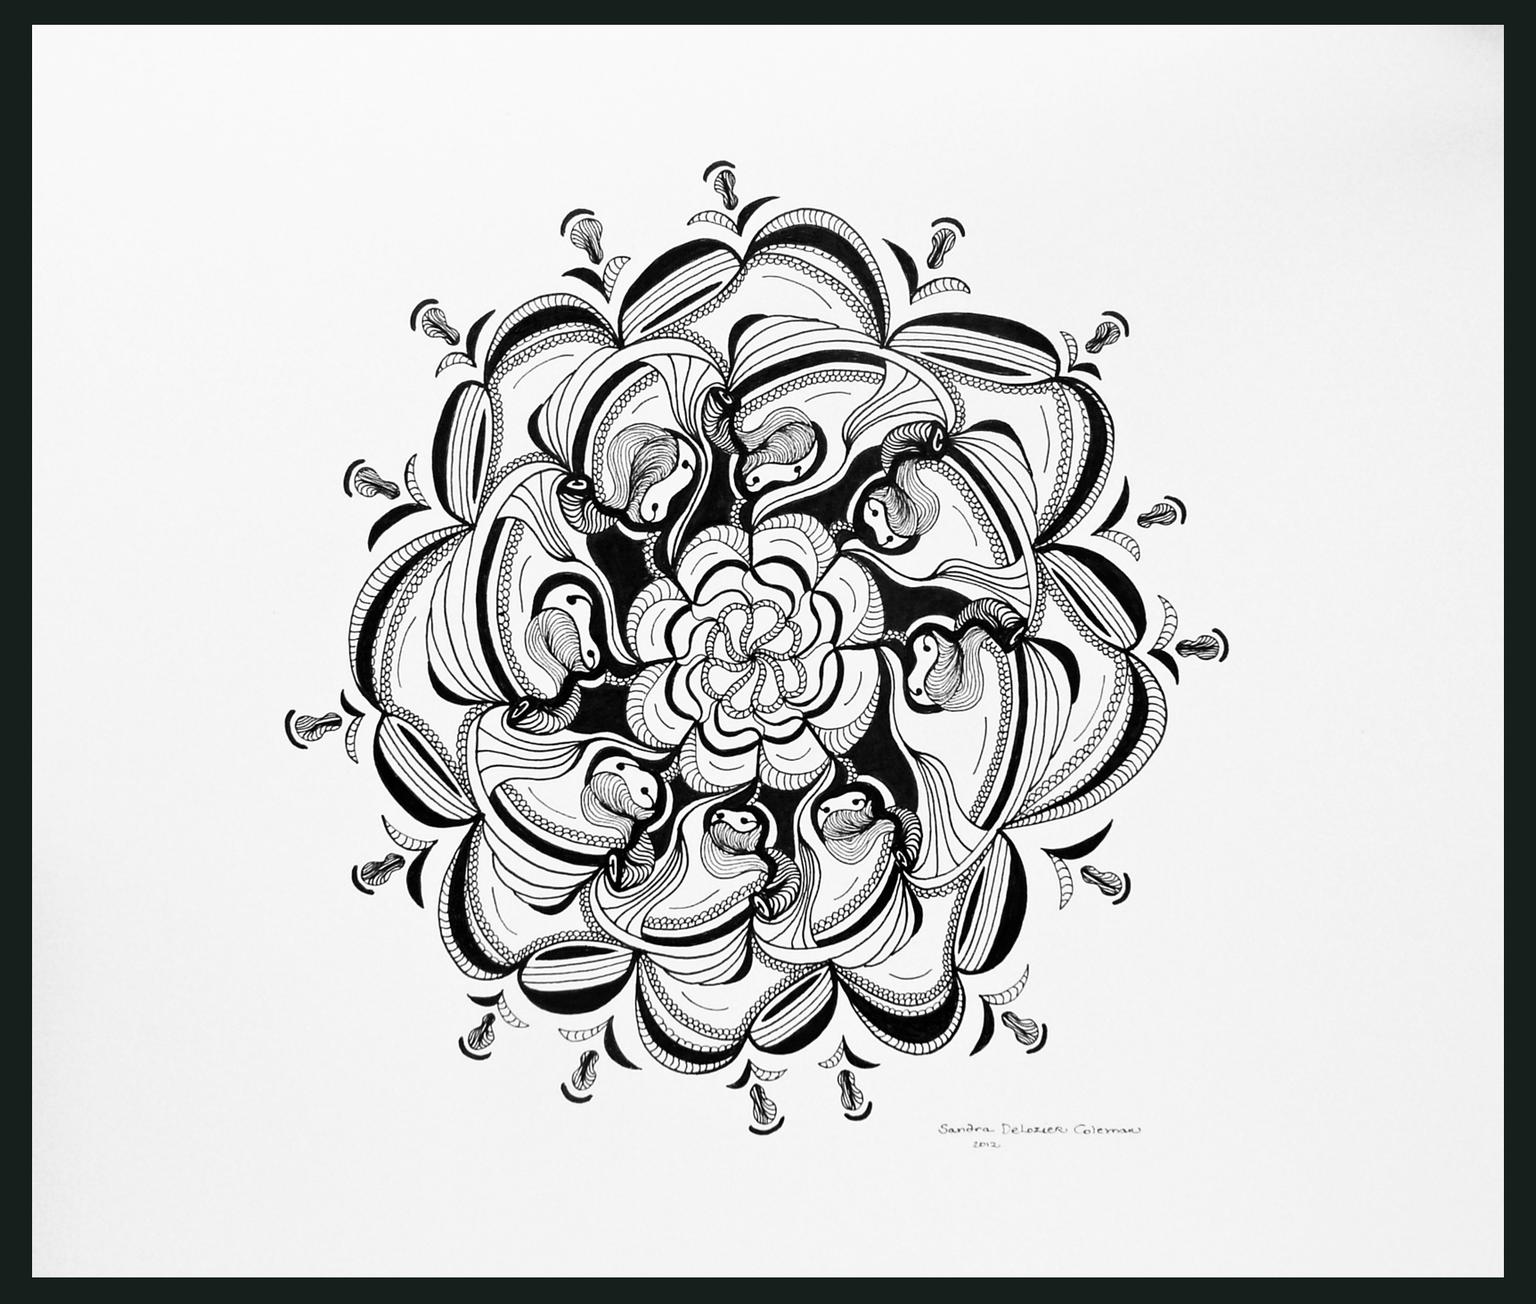 Image for entry 'Swirling Symmetry'